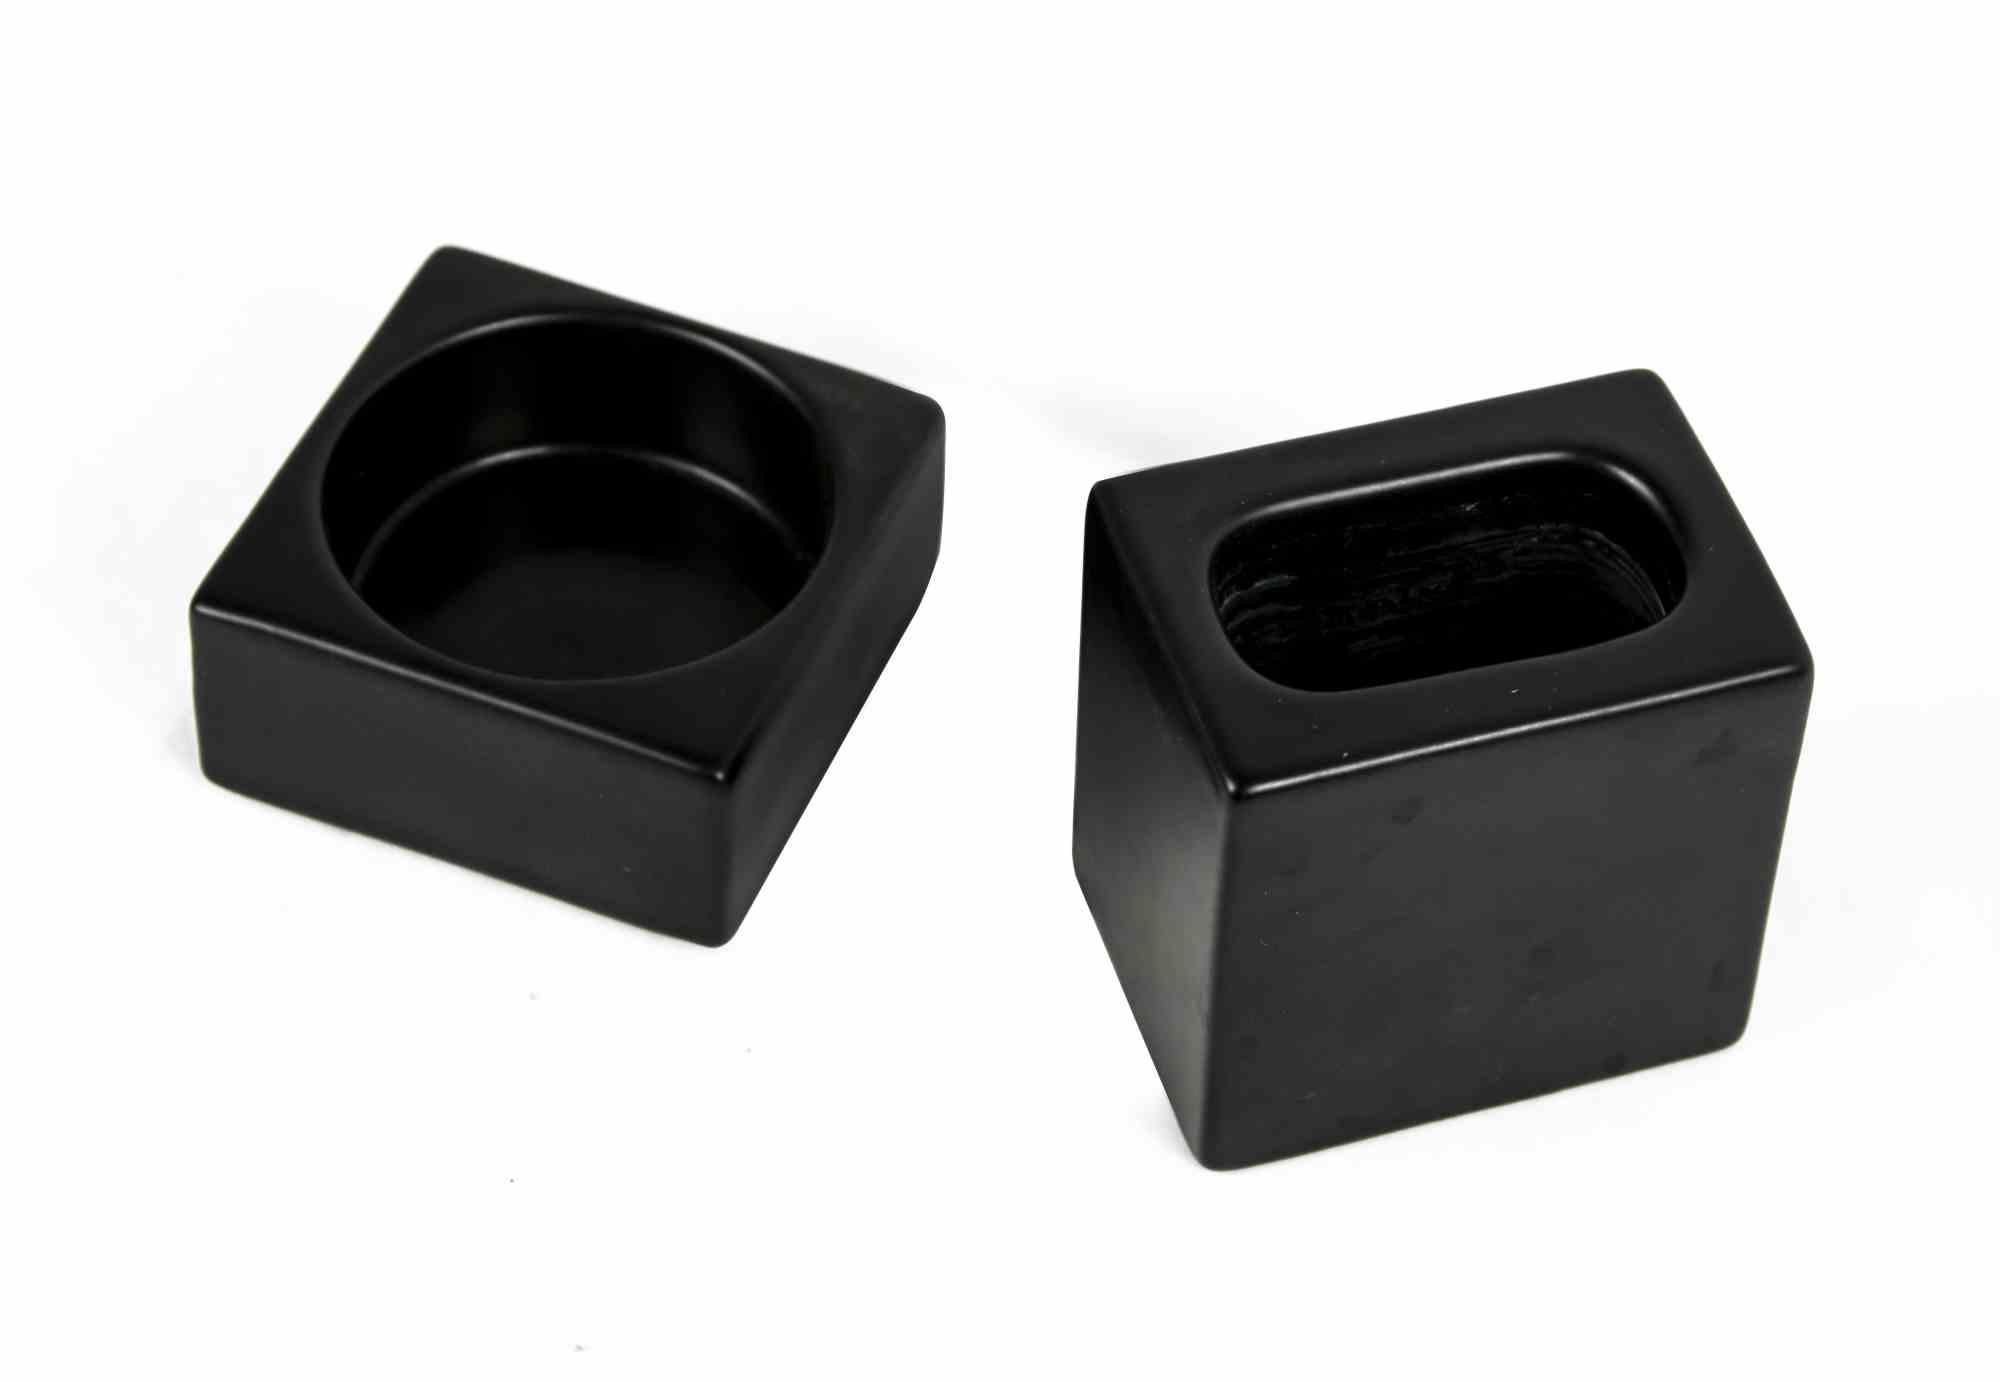 Vintage set of Pozzi Ceramics is an original set of decorative objects realized by Pozzi Ceramiche in the 1970s.

Set of black ceramics designed by Pierre Cardin for Pozzi Ceramiche (as reported on the label).

The set consist of two black